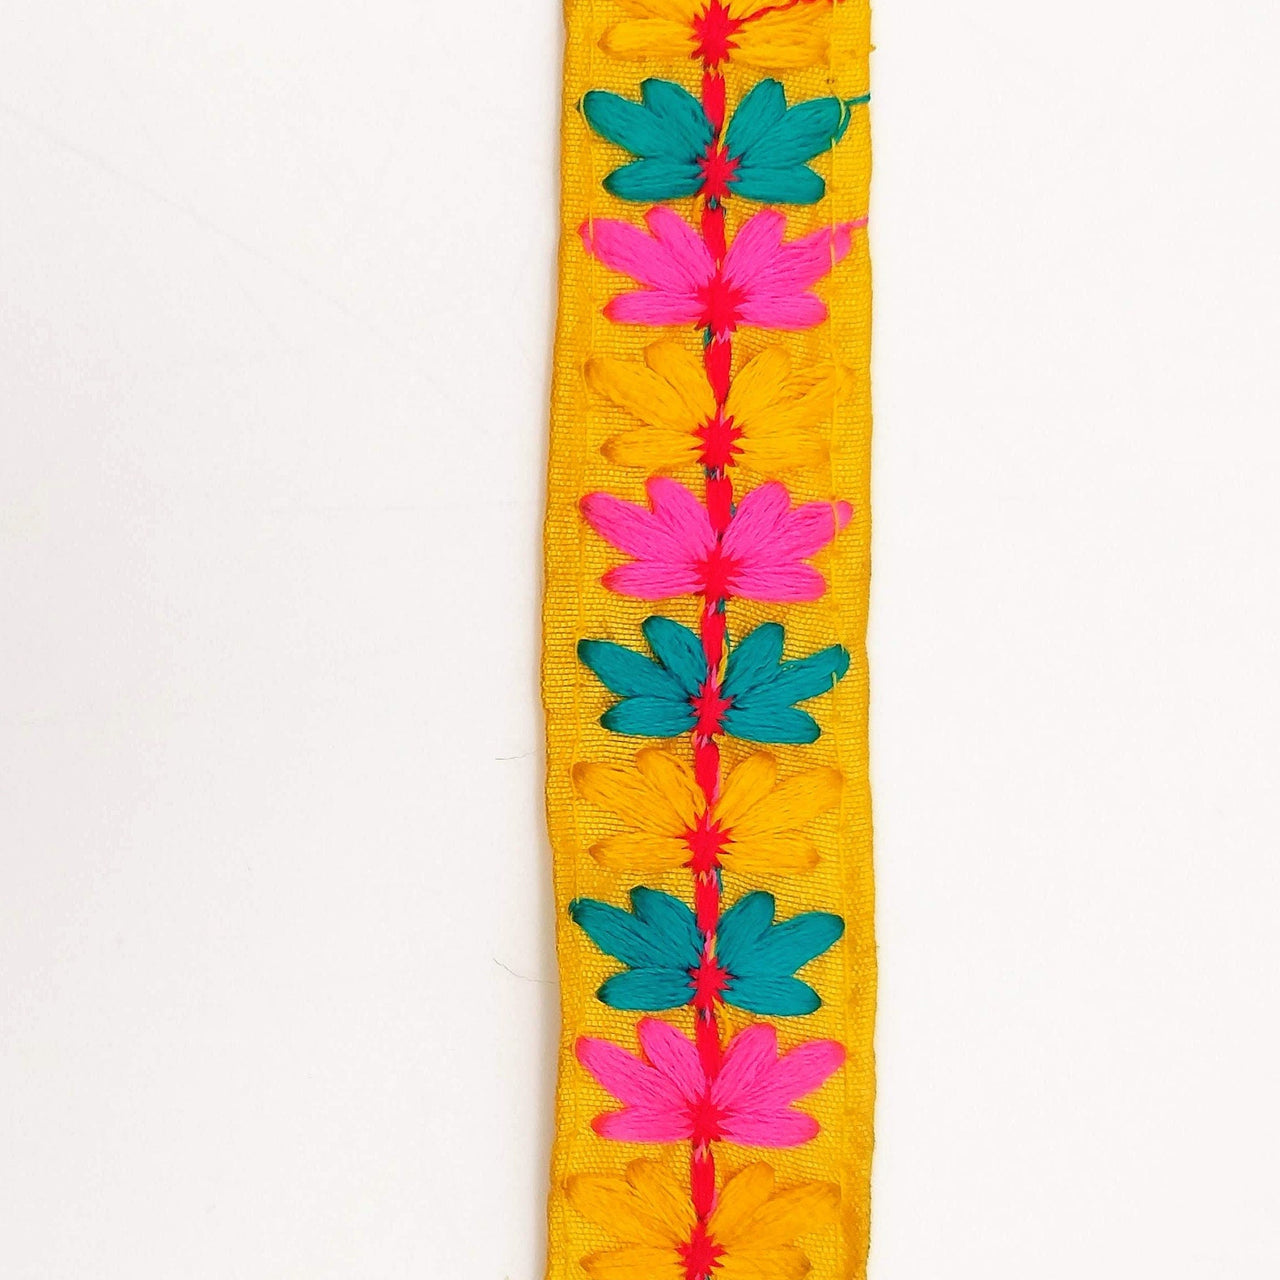 Yellow Cotton Fabric Trim with Floral Embroidery in Blue, Pink, Yellow and Red